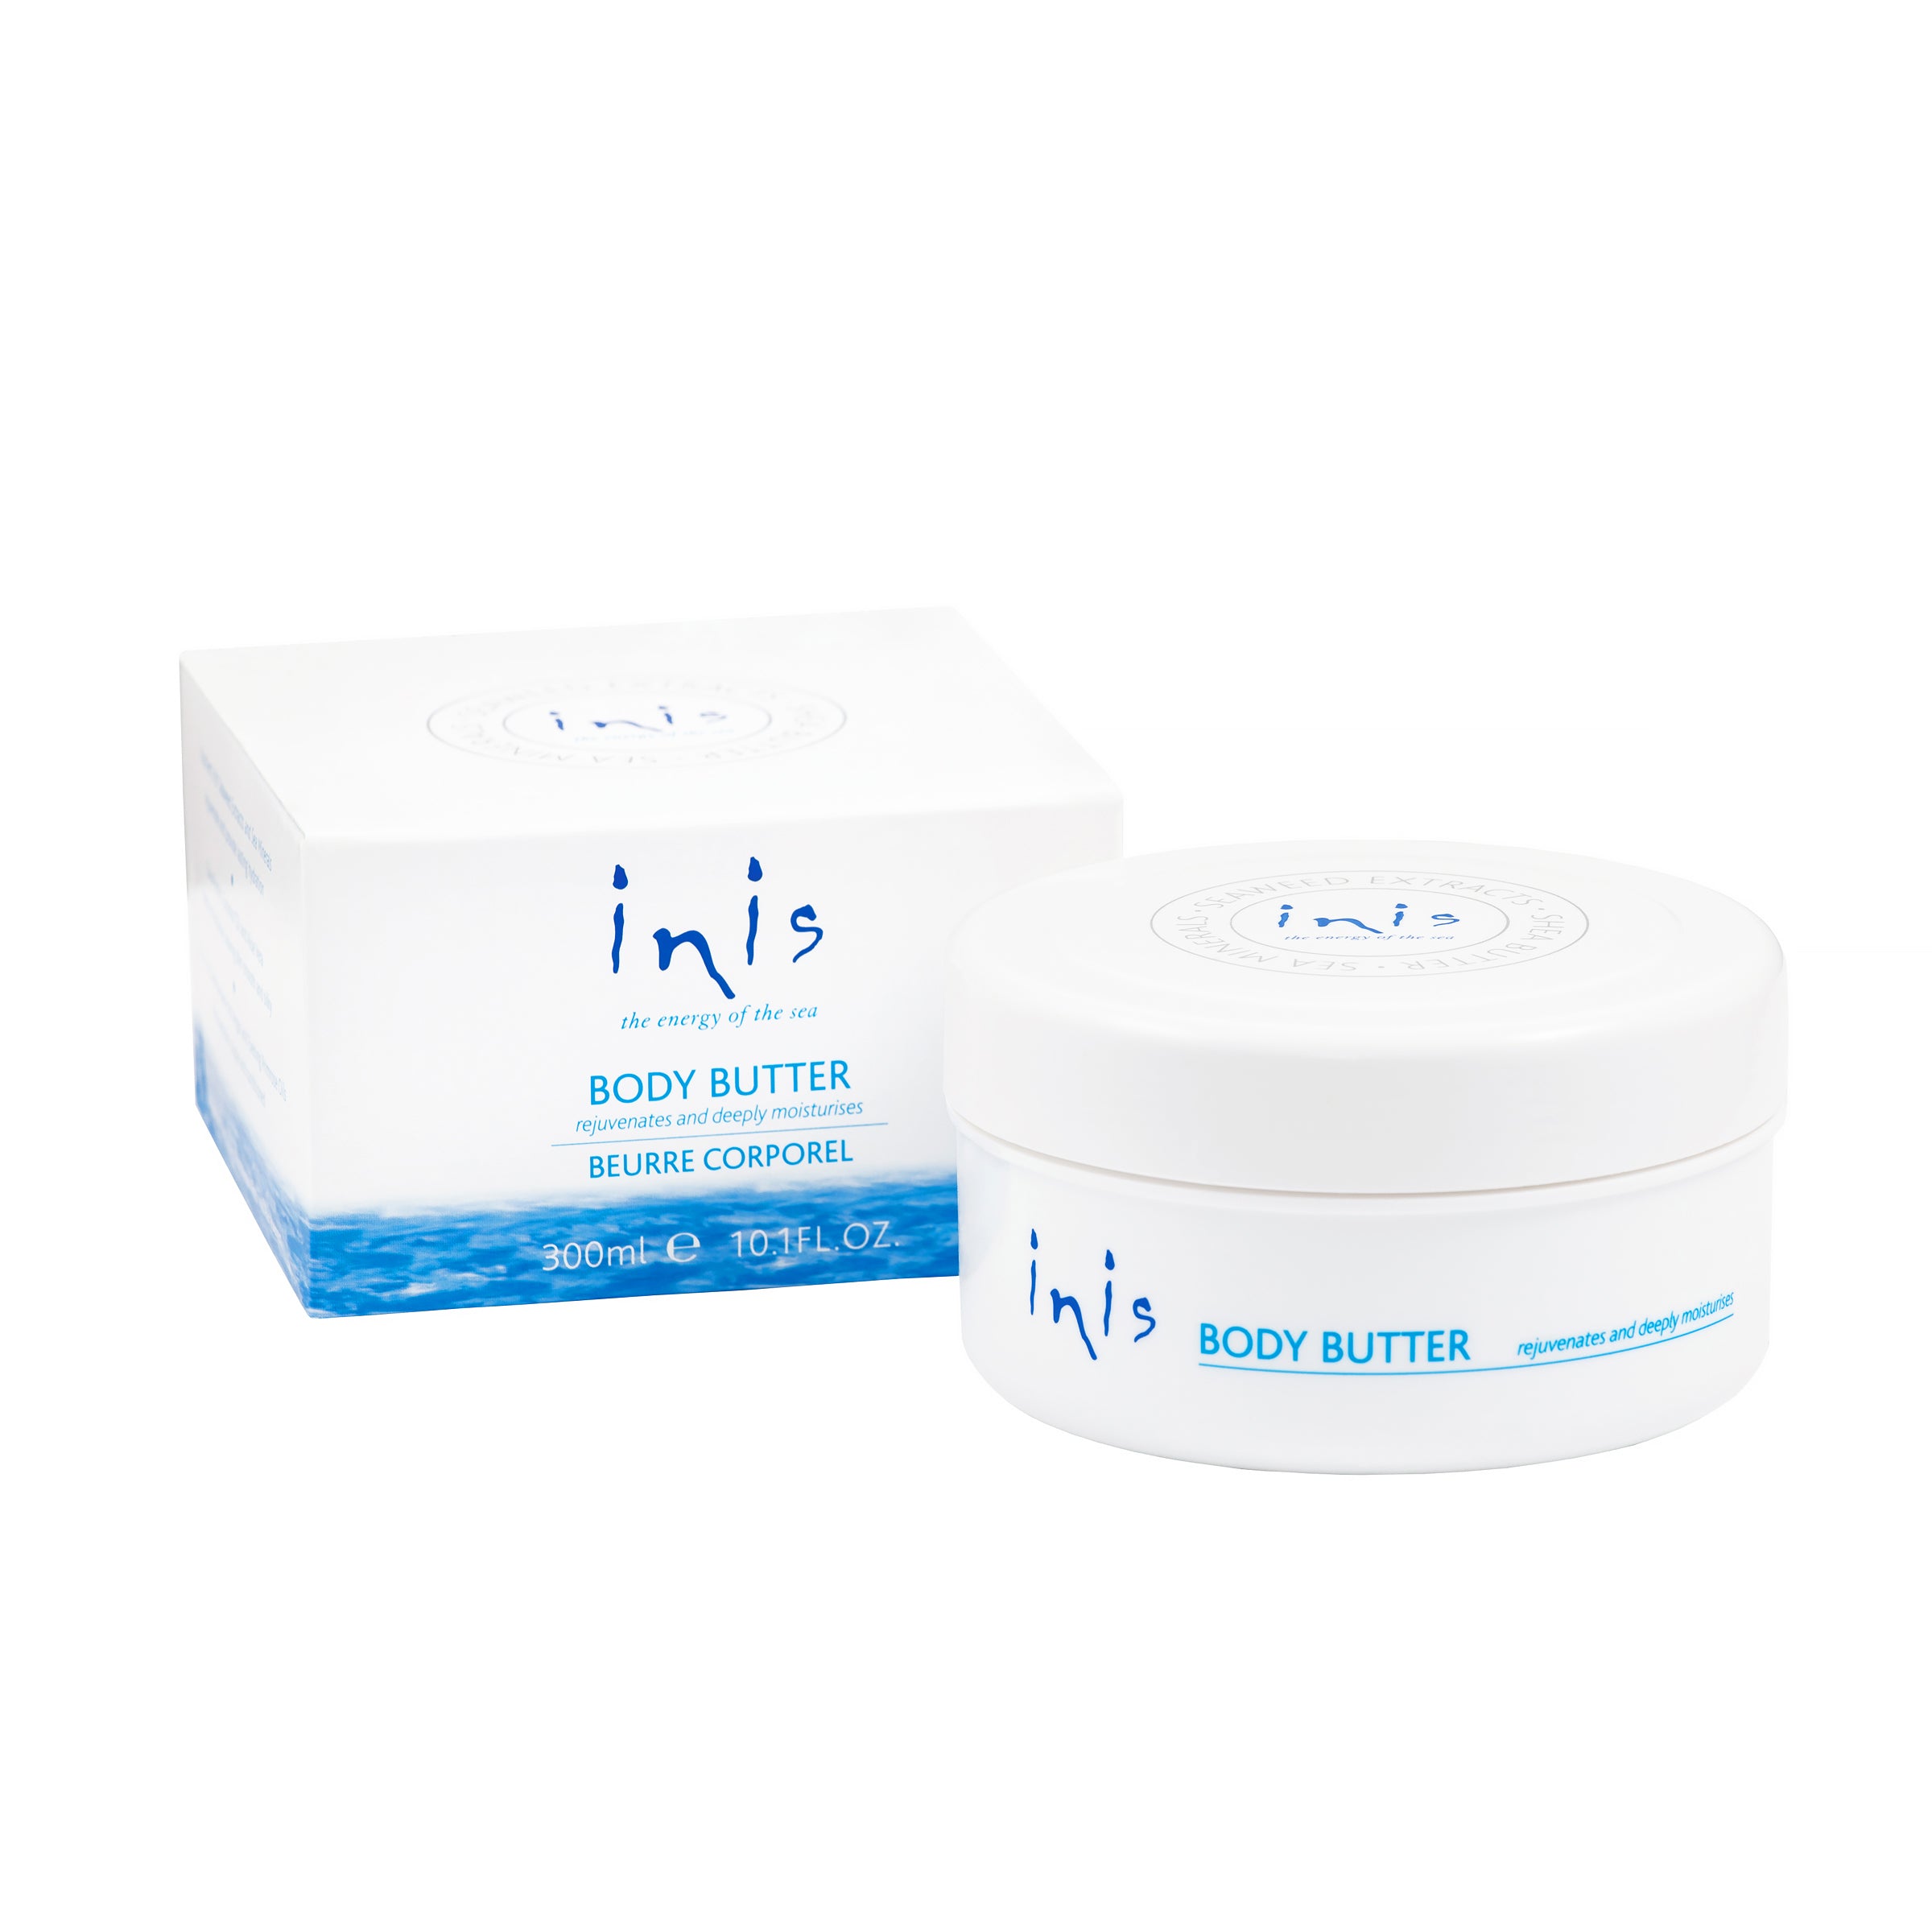 Inis Body Butter and display box